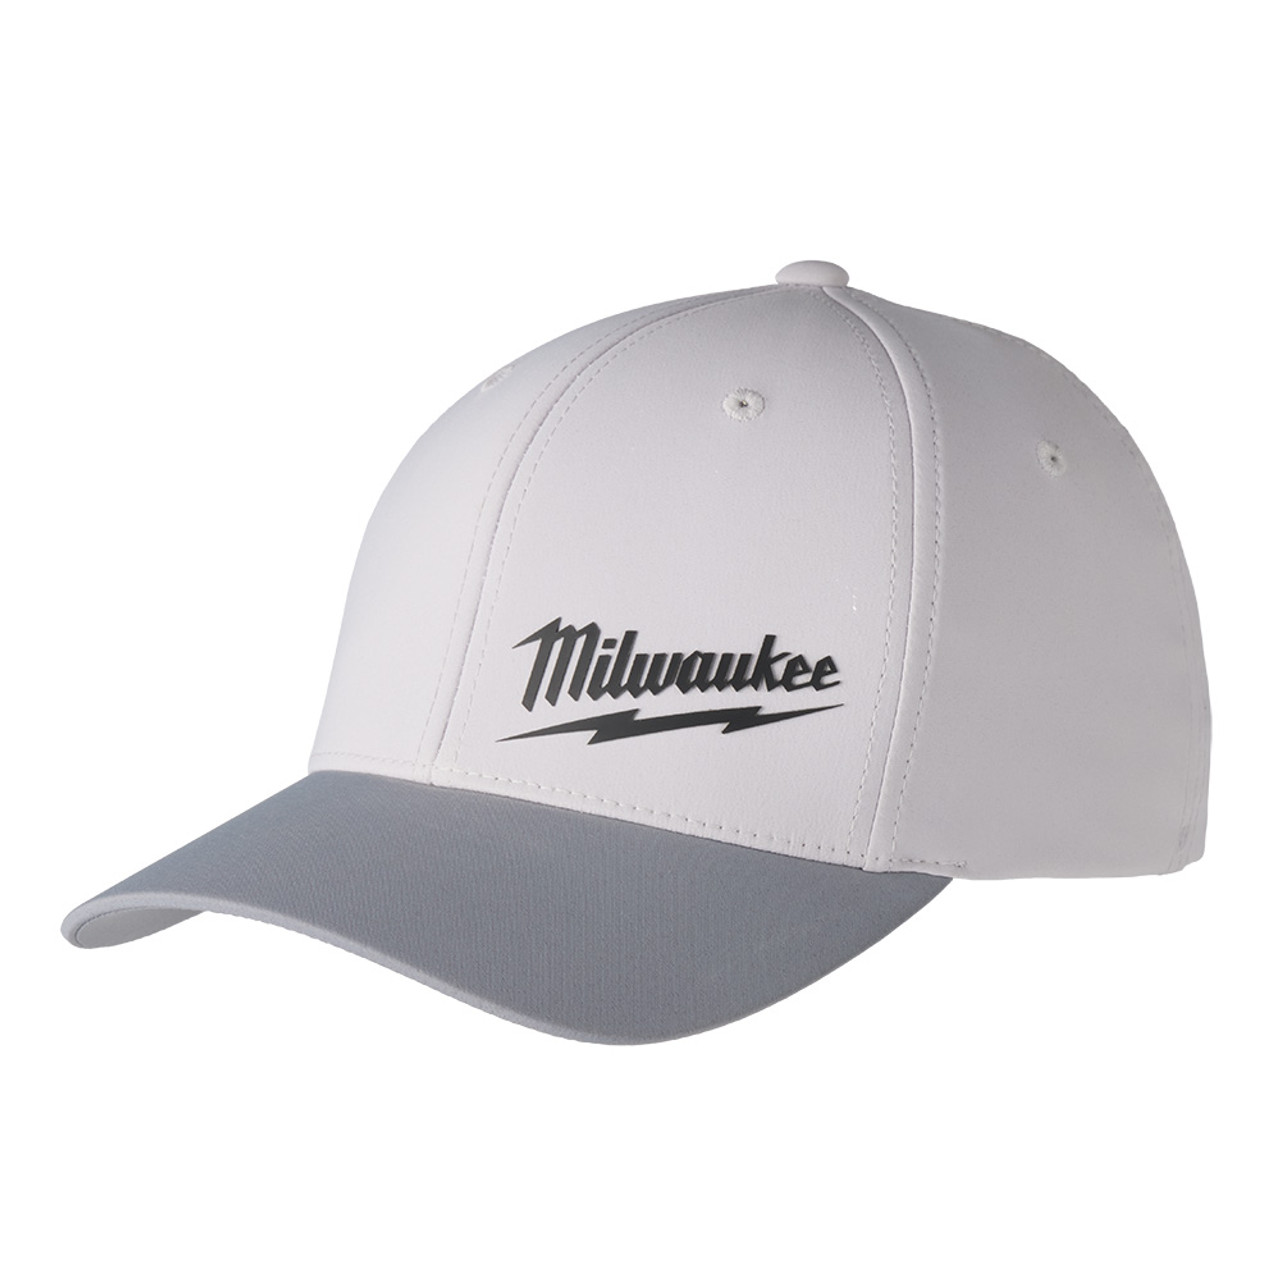 Milwaukee 507G-SM WORKSKIN Gray Fitted Hat S/M